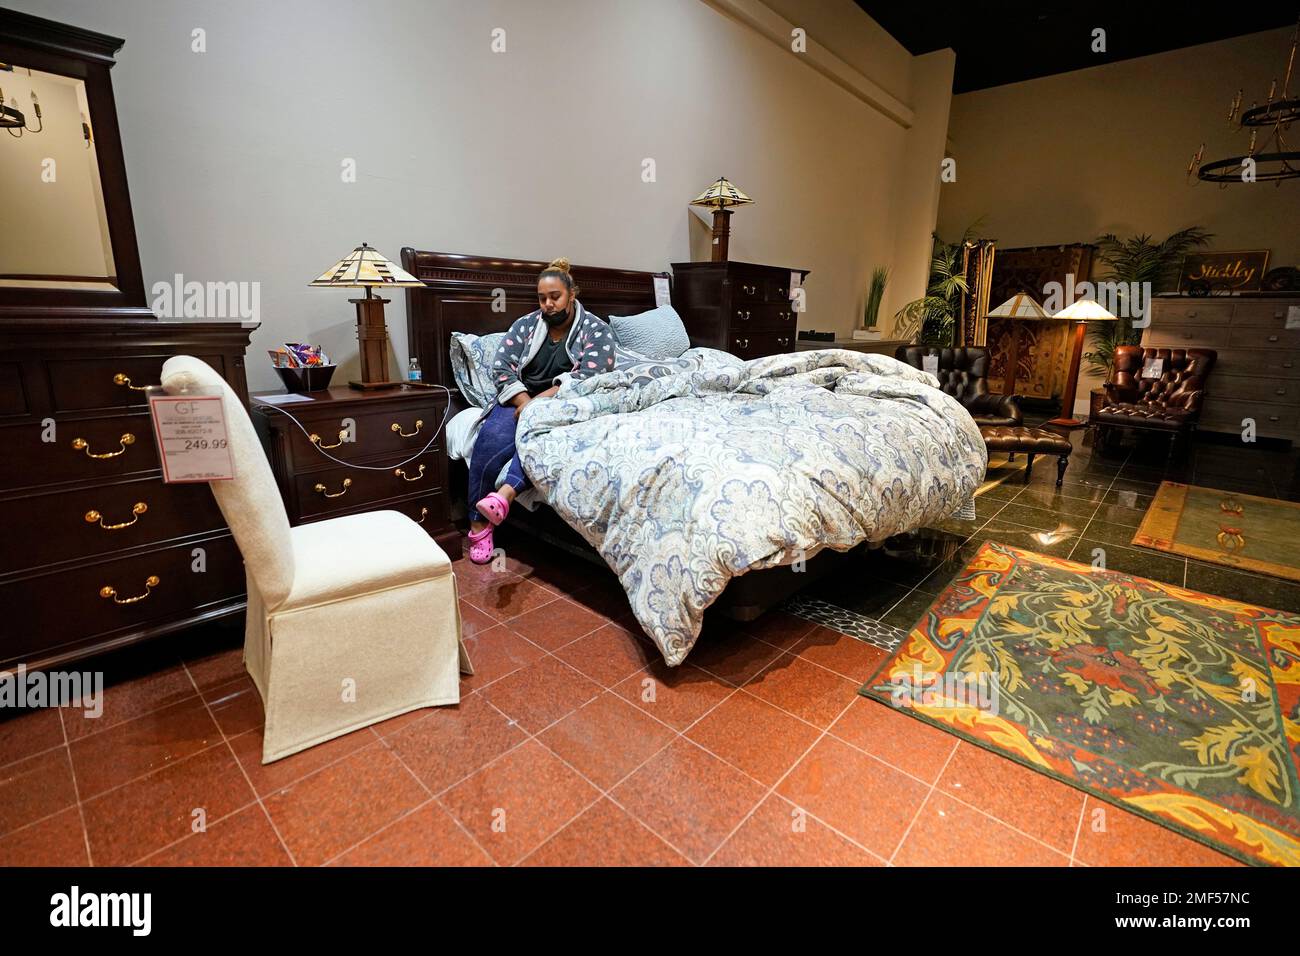 Gallery Furniture store turns into Houston shelter